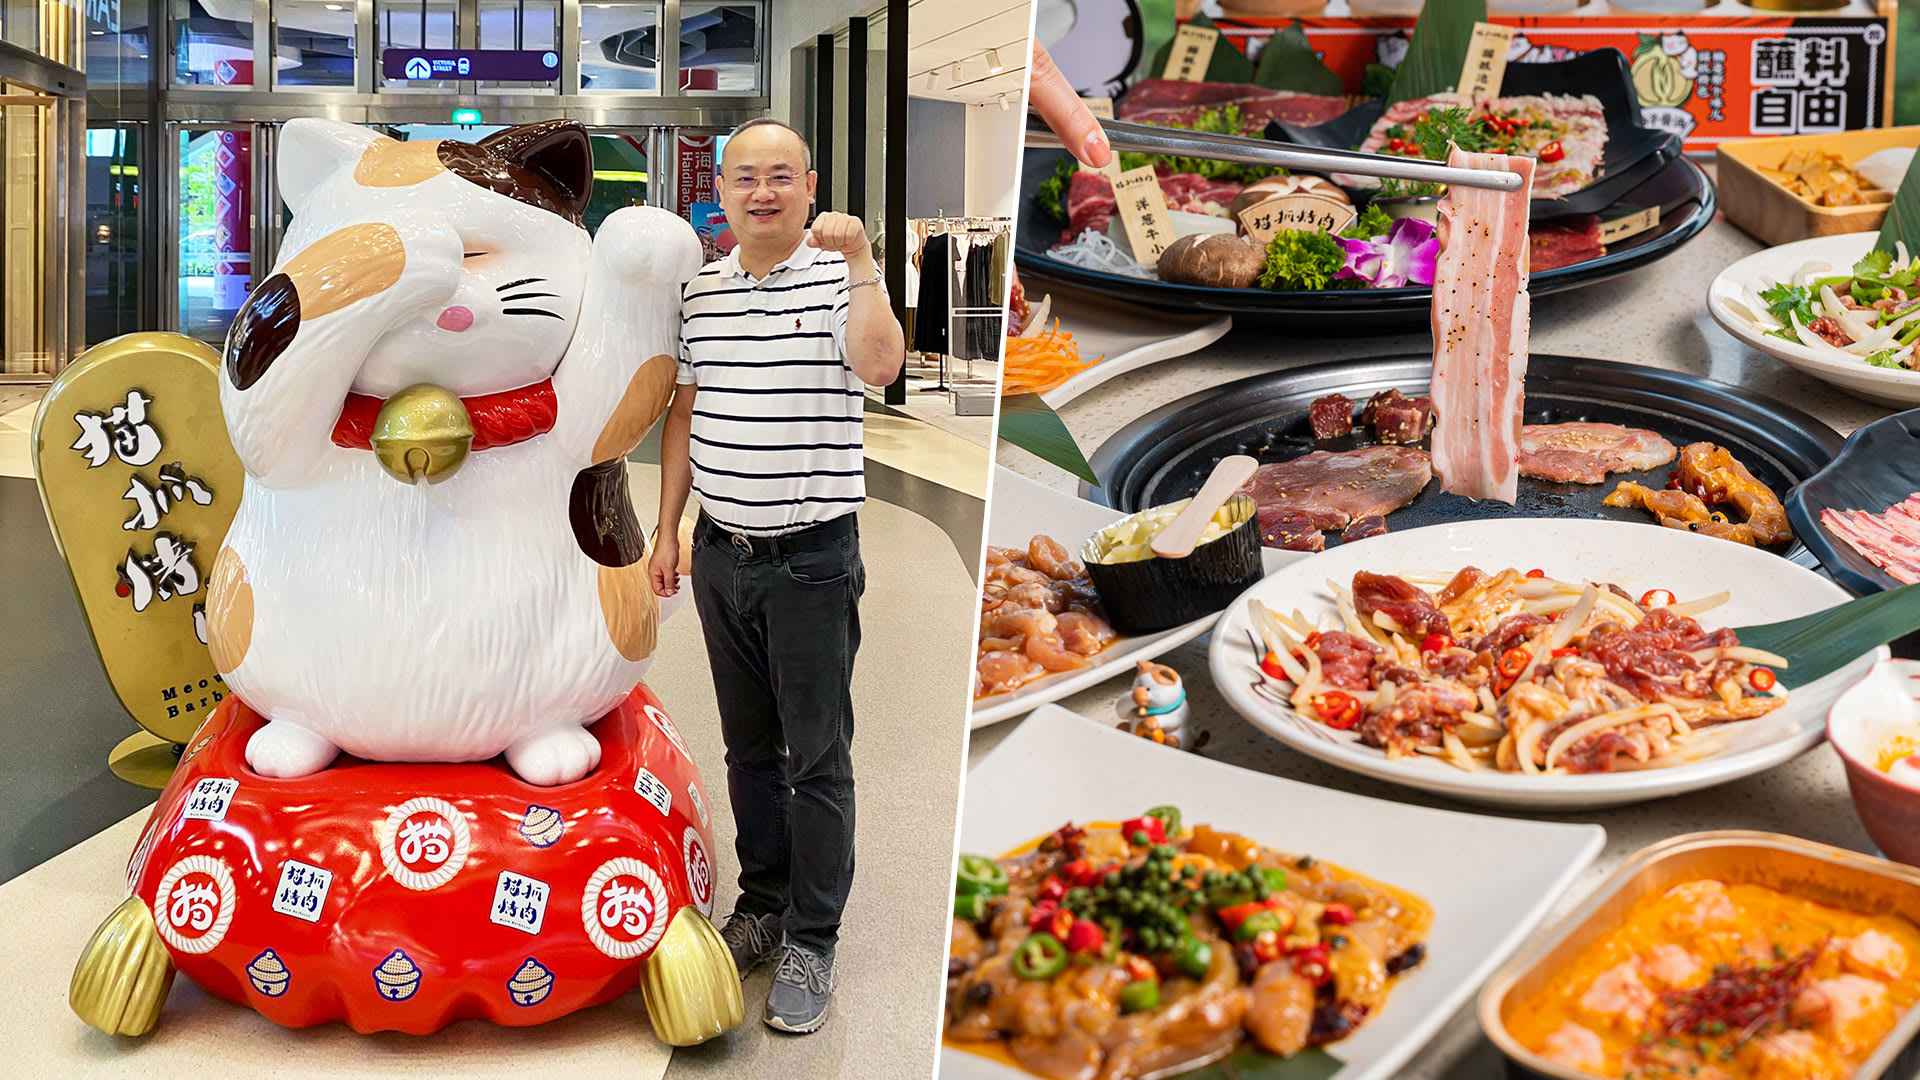 “People Ask If We Sell Grilled Cat Meat” — Cat-Themed BBQ Chain Owner Opens 1st S’pore Outlet With $8.80 Beef Donburi